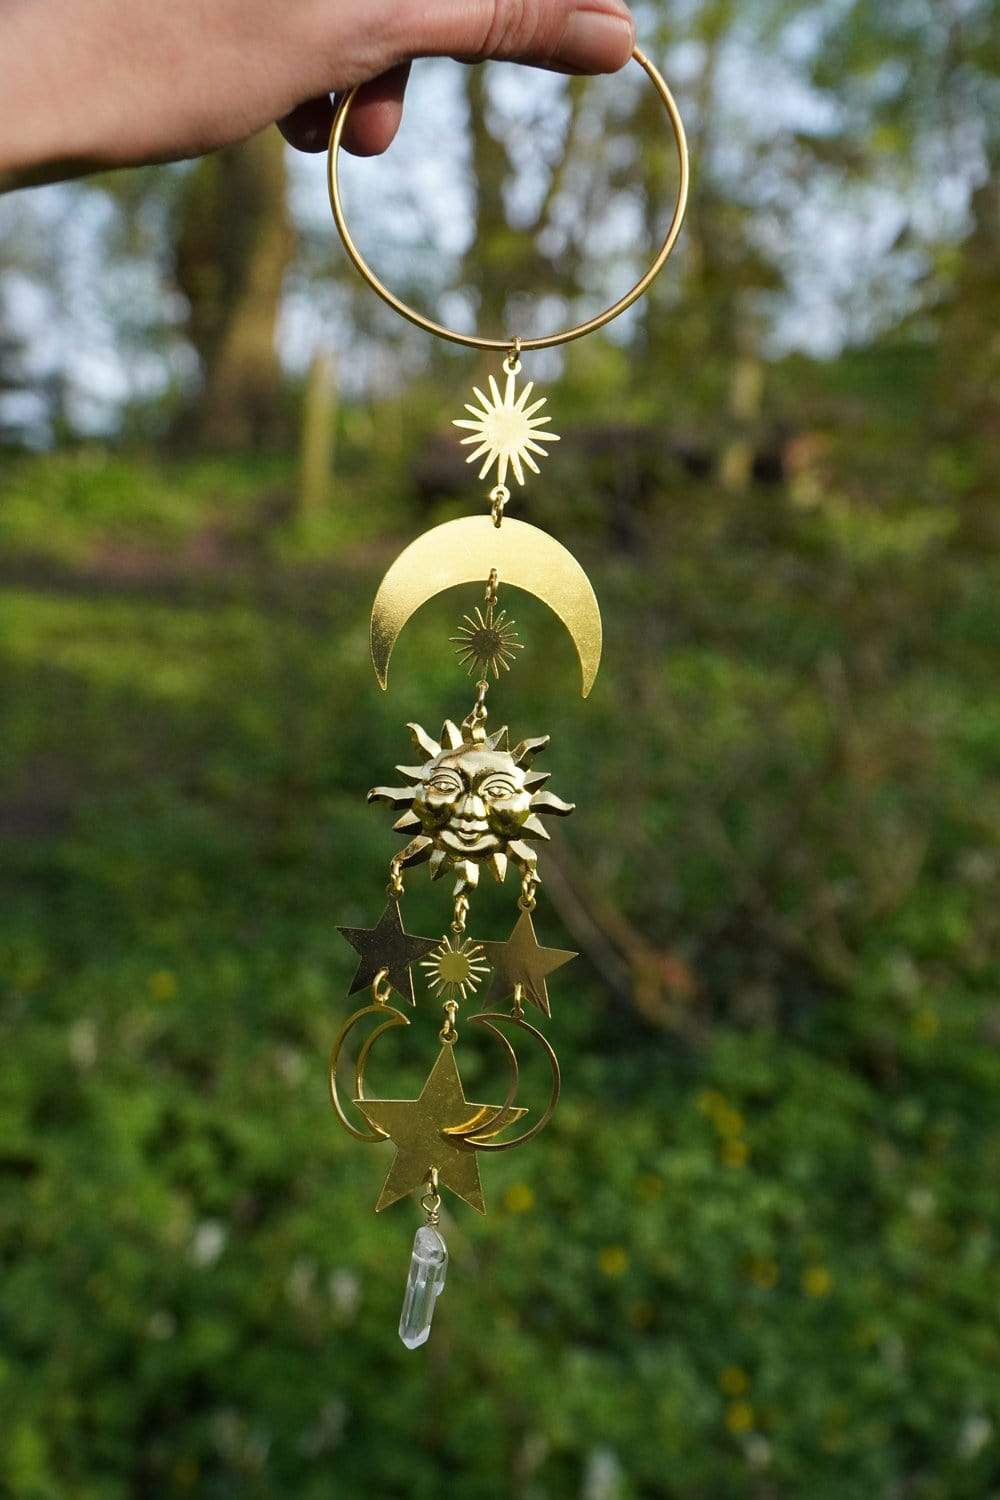 wickedafstore Celestial Sun Moon and Stars Hanging Decor